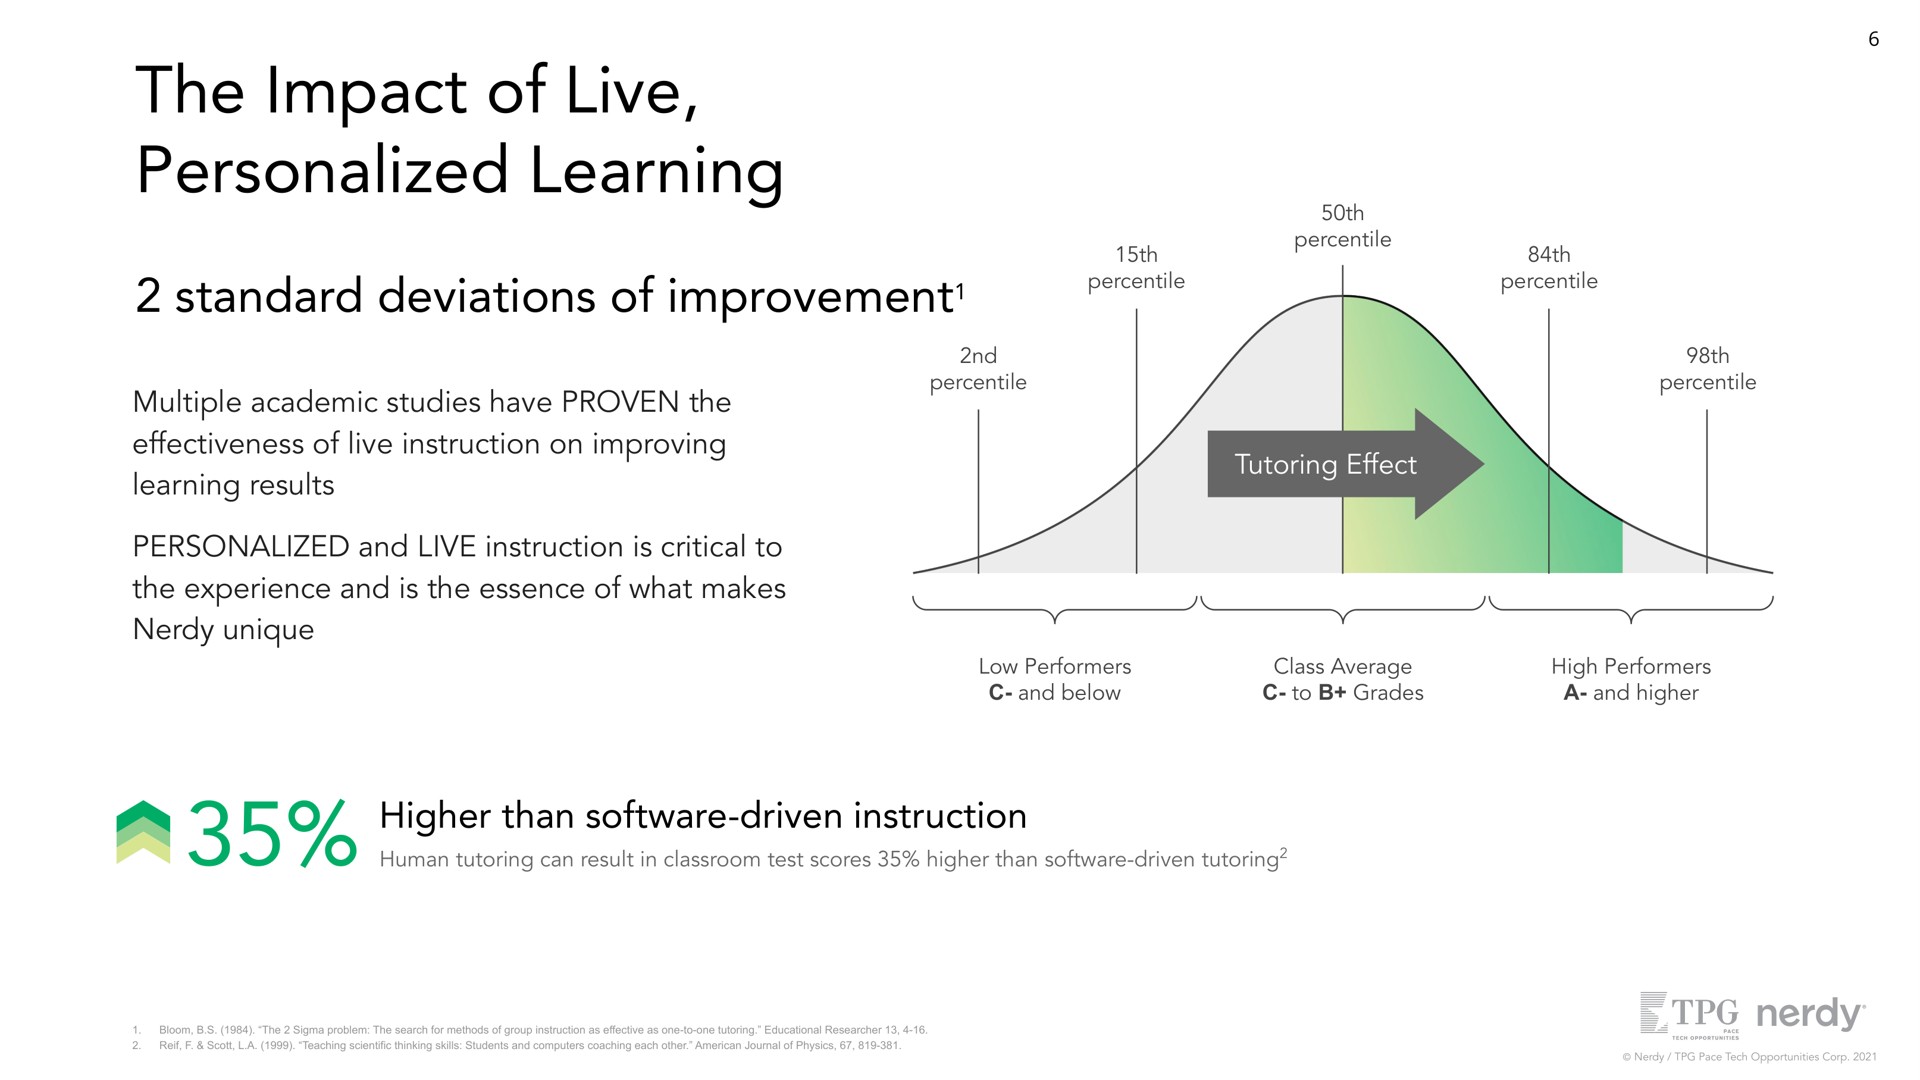 the impact of live personalized learning standard deviations of improvement multiple academic studies have proven the effectiveness of live instruction on improving learning results personalized and live instruction is critical to the experience and is the essence of what makes unique tutoring effect higher than driven instruction | Nerdy